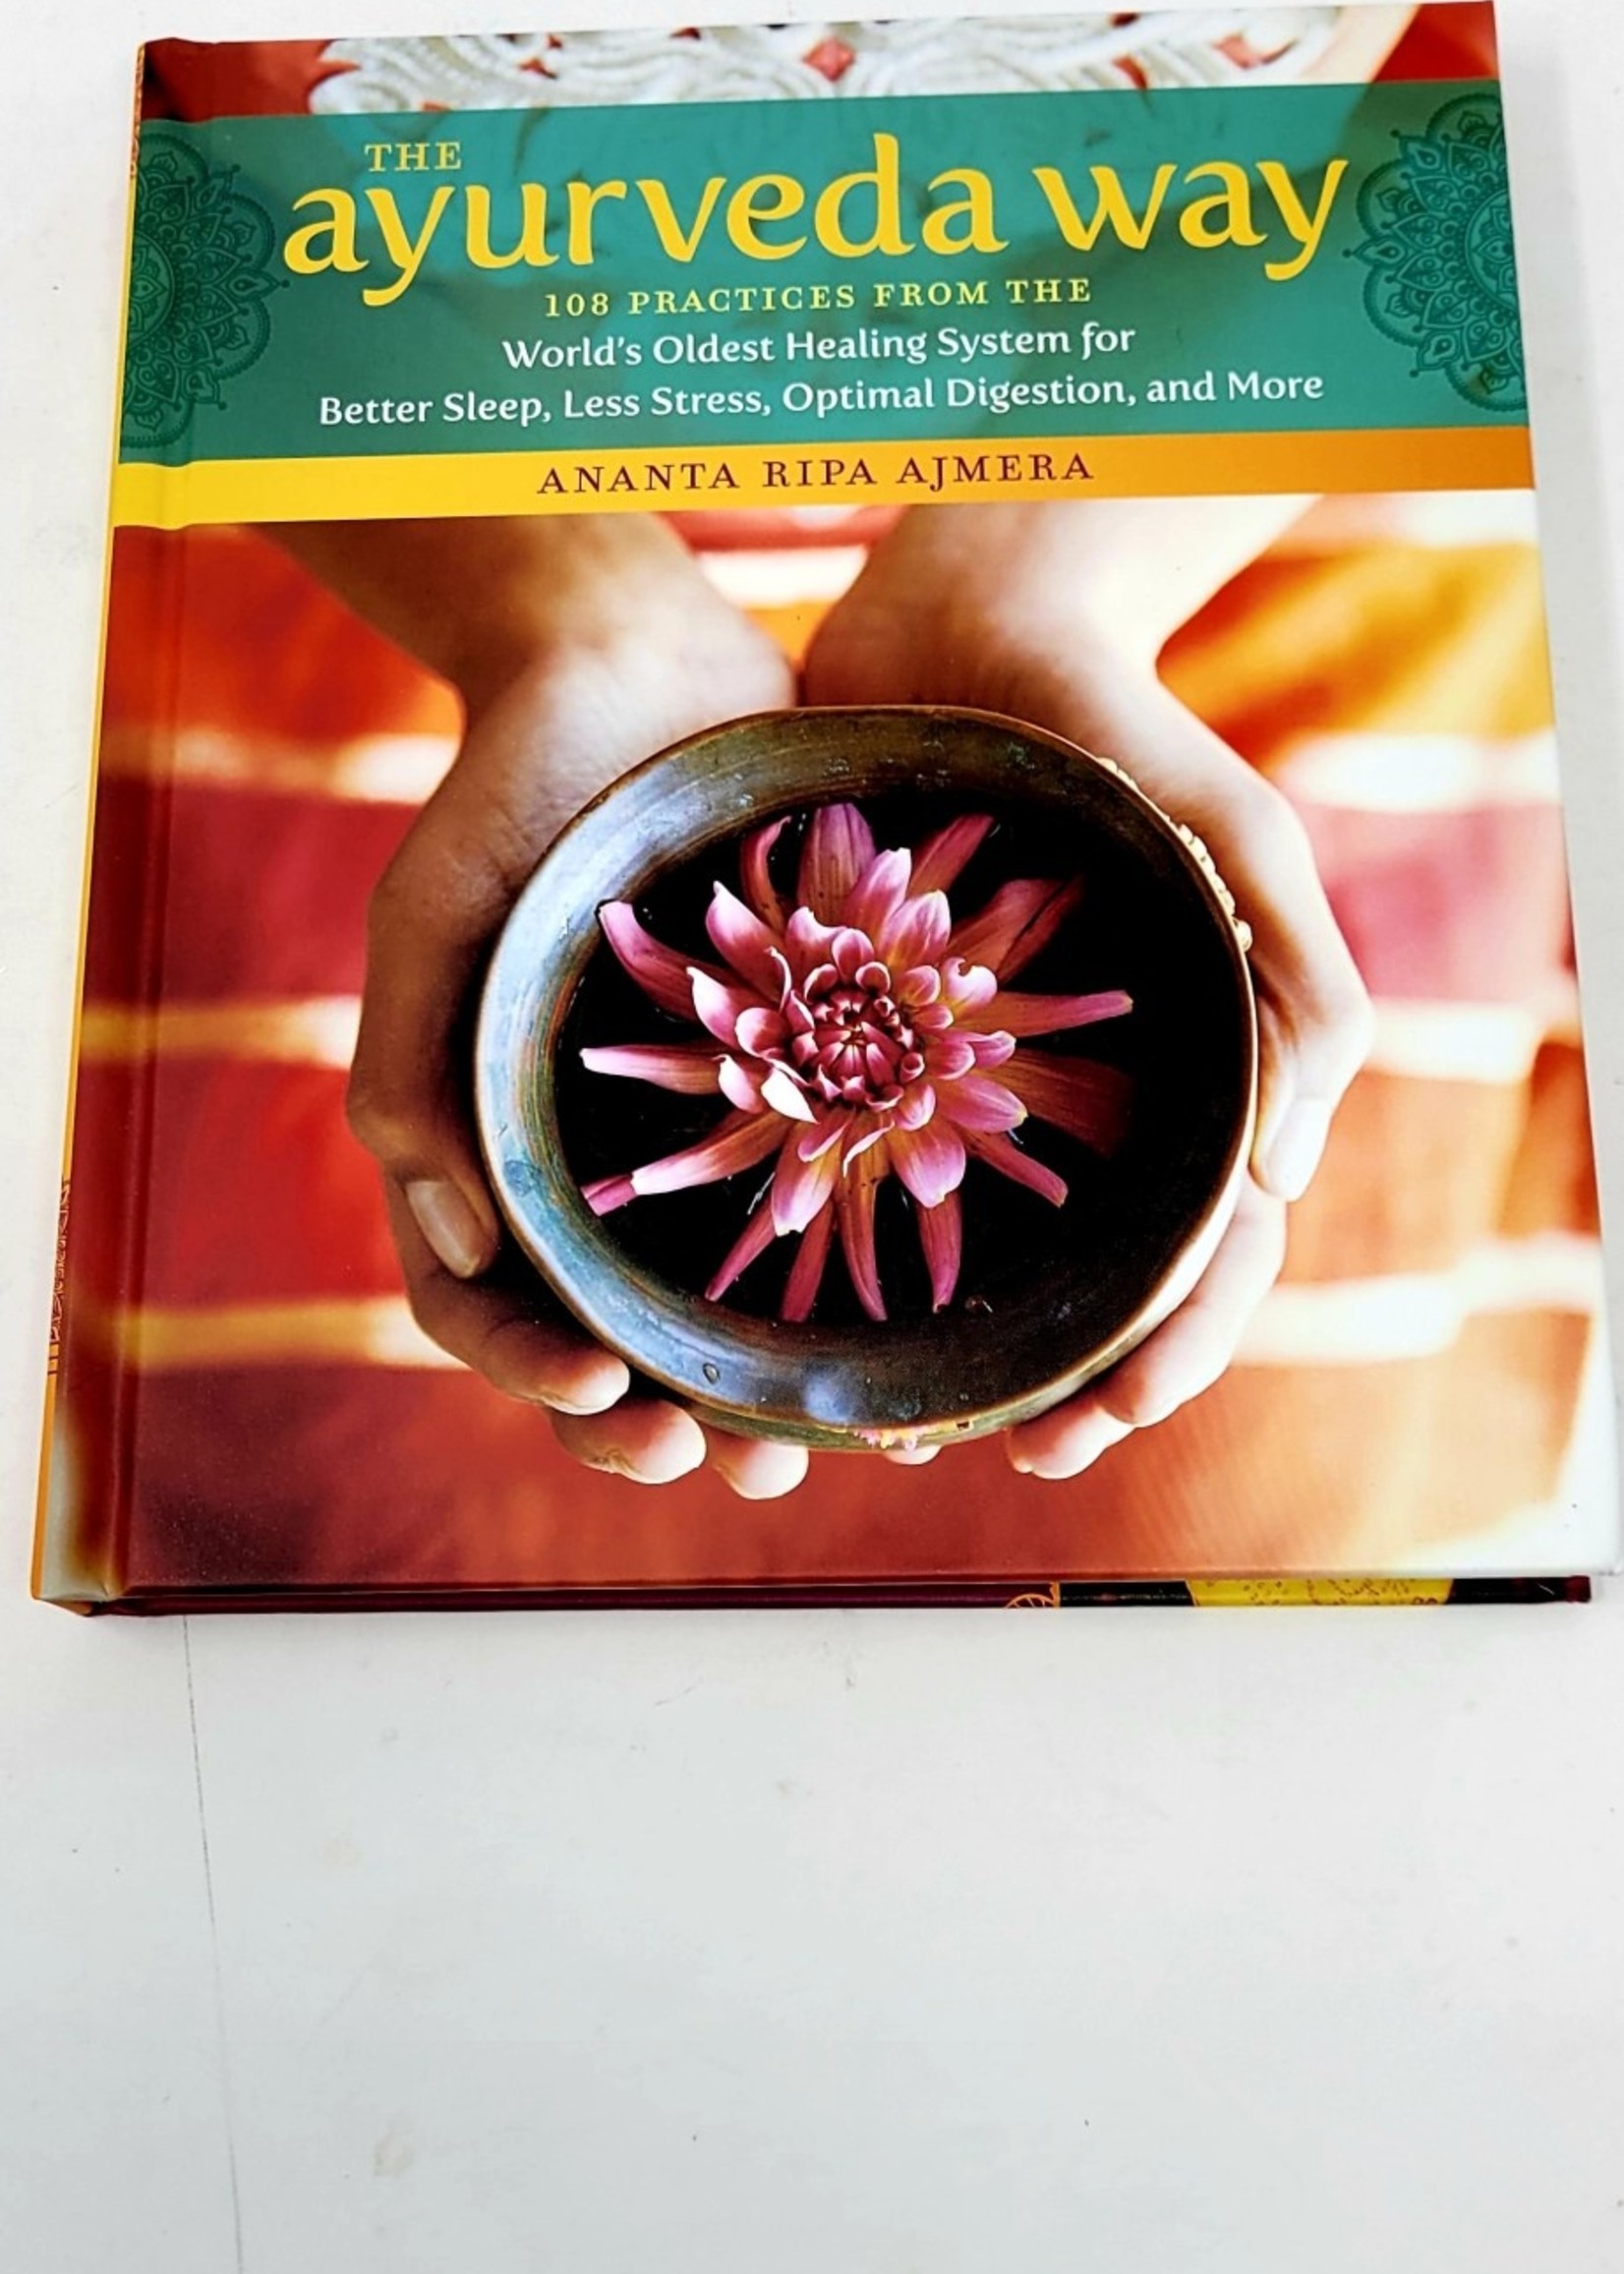 The Ayurveda Way 108 Practices from the World’s Oldest Healing System for Better Sleep, Less Stress, Optimal Digestion, and More -by Ananta Ripa Ajmera